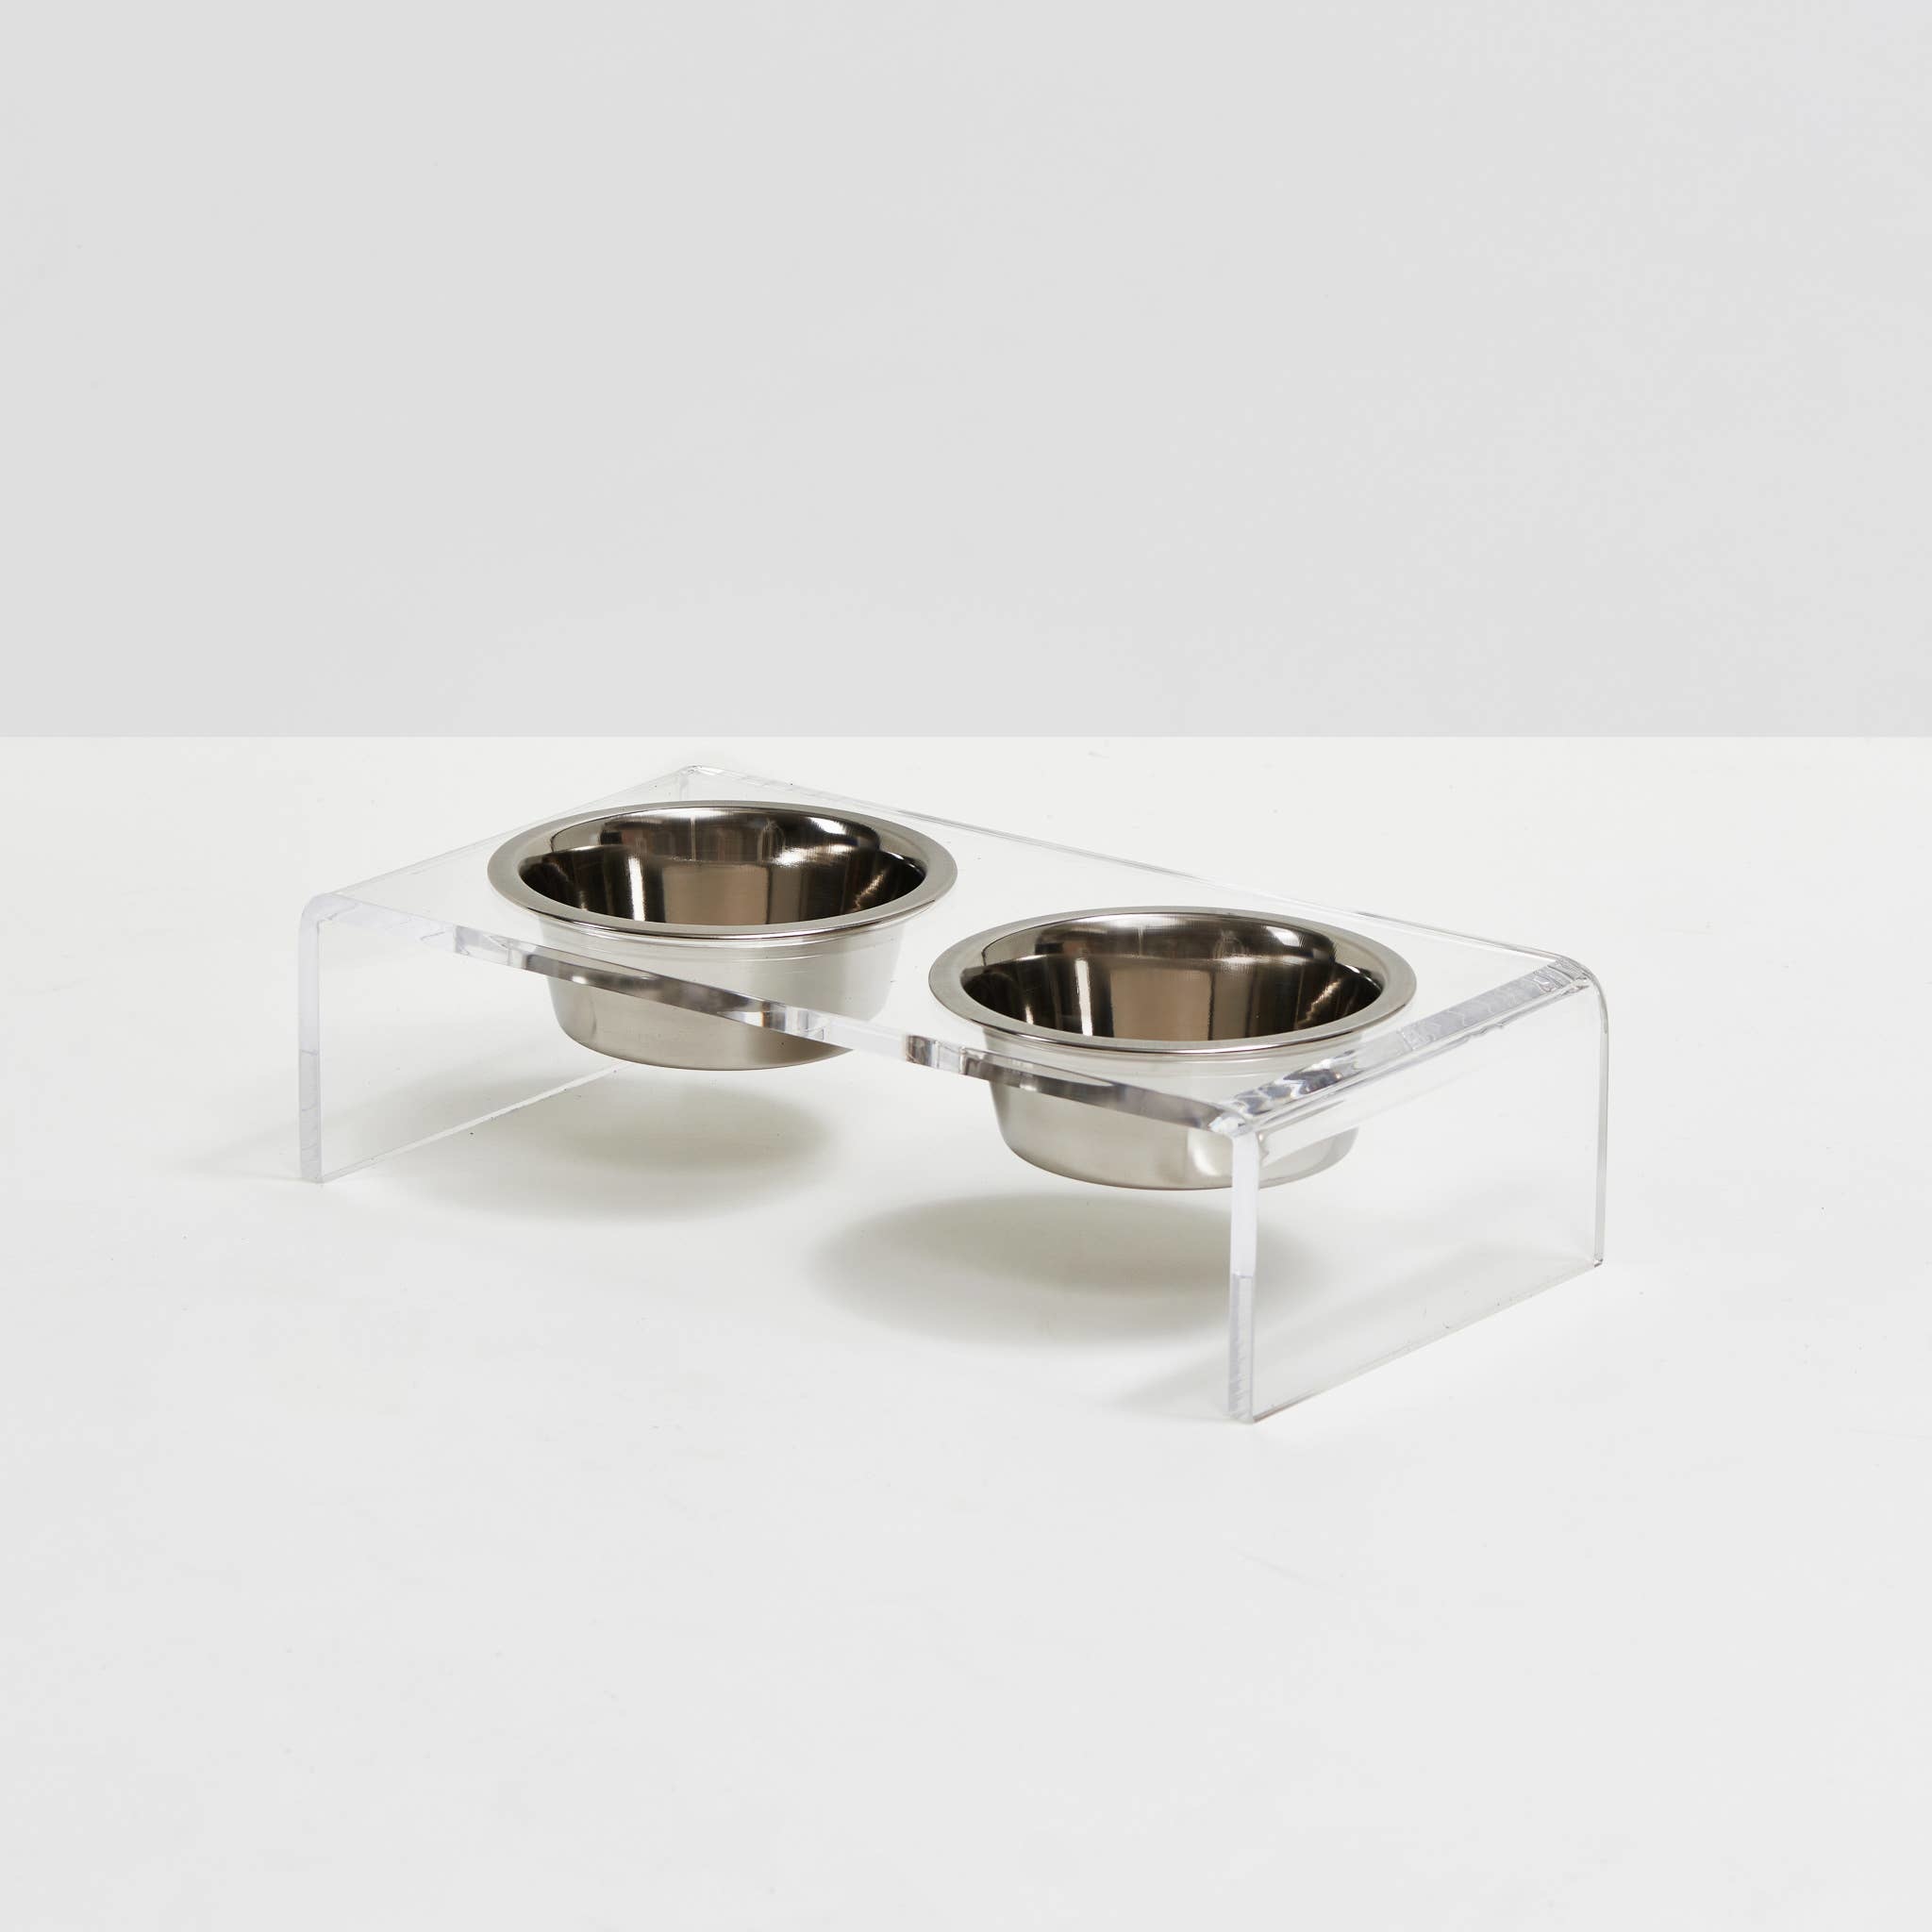 Clear Double Dog Bowl Feeder with Glass Bowls